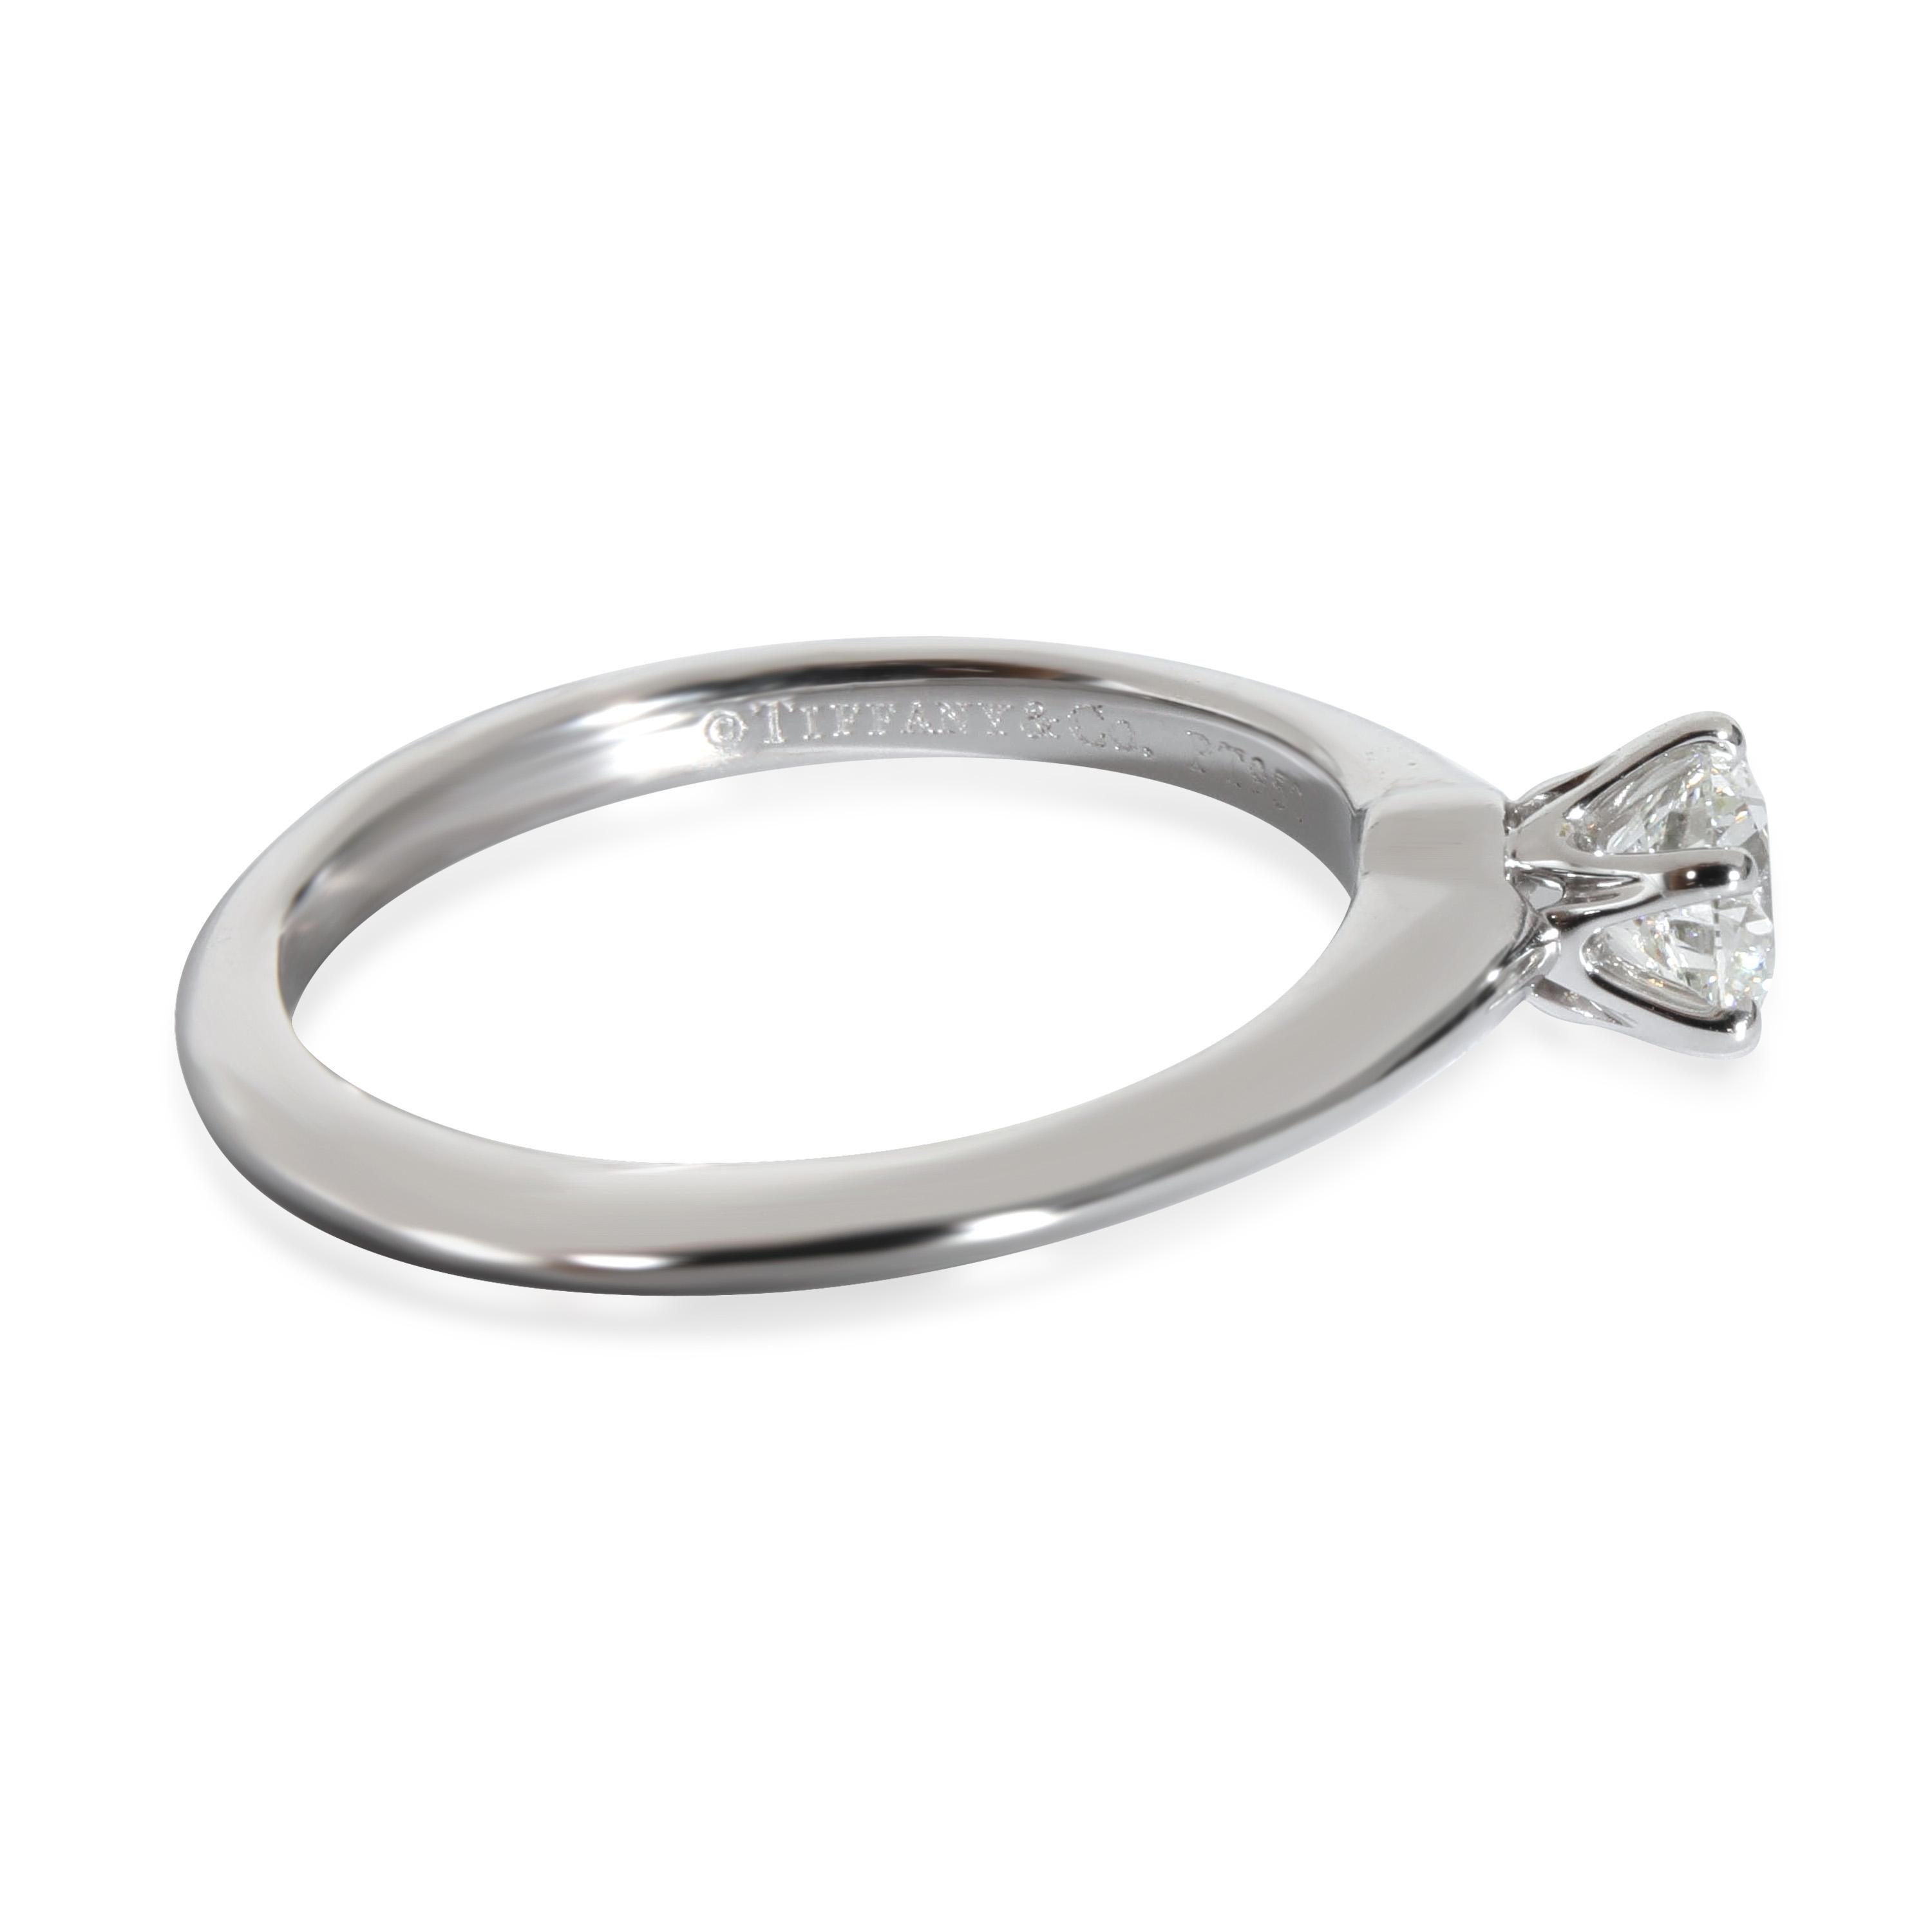 Tiffany & Co. Diamond Engagement Ring in  Platinum H VS2 0.40 CTW

PRIMARY DETAILS
SKU: 131921
Listing Title: Tiffany & Co. Diamond Engagement Ring in  Platinum H VS2 0.40 CTW
Condition Description: Tiffany reinvents a classic with the Return To